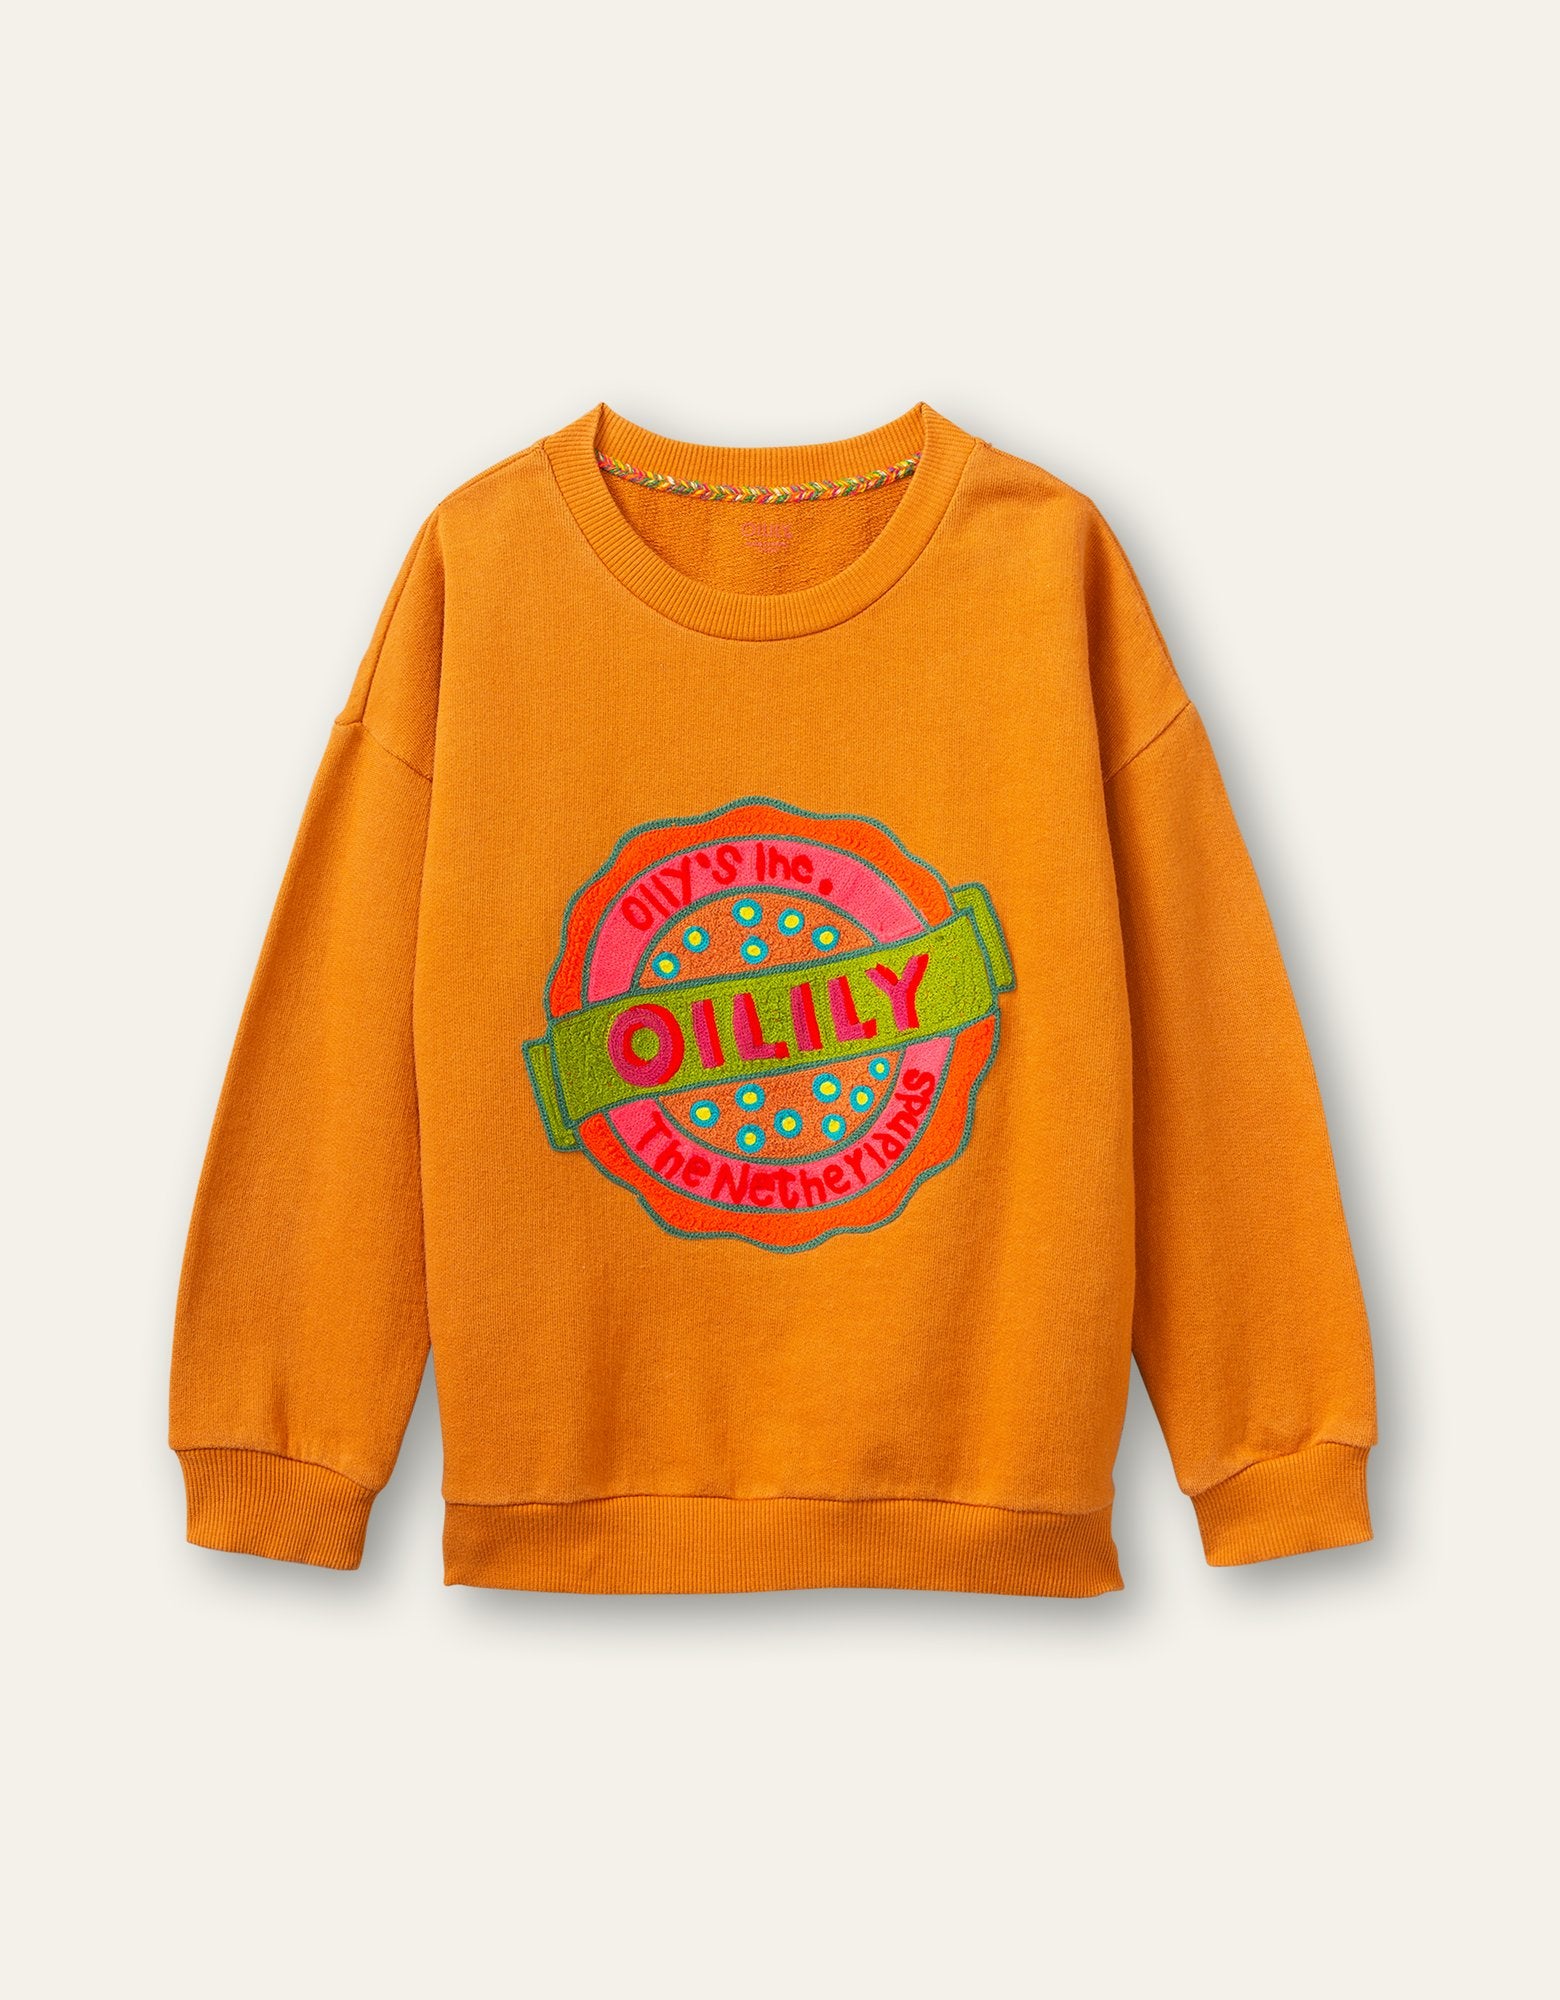 Oilily Heritage Sweater 86 with artwork